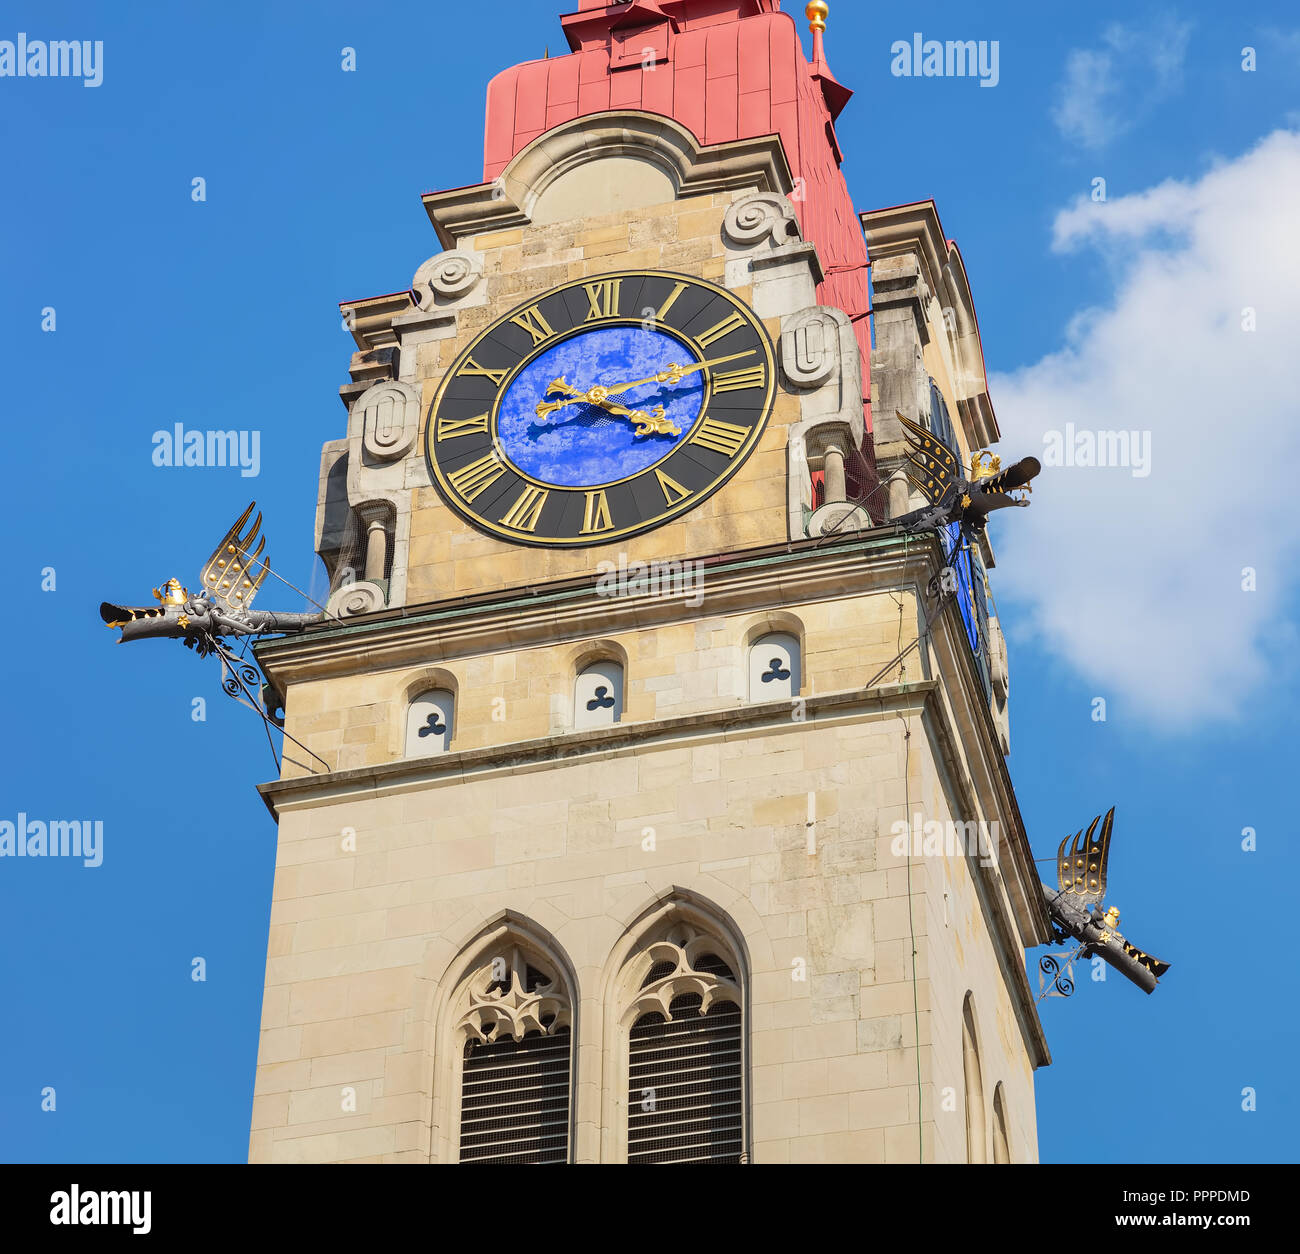 Partial view of one of two towers of the City Church of Winterthur (German: Stadtkirche Winterthur) in Switzerland against blue sky. Stock Photo